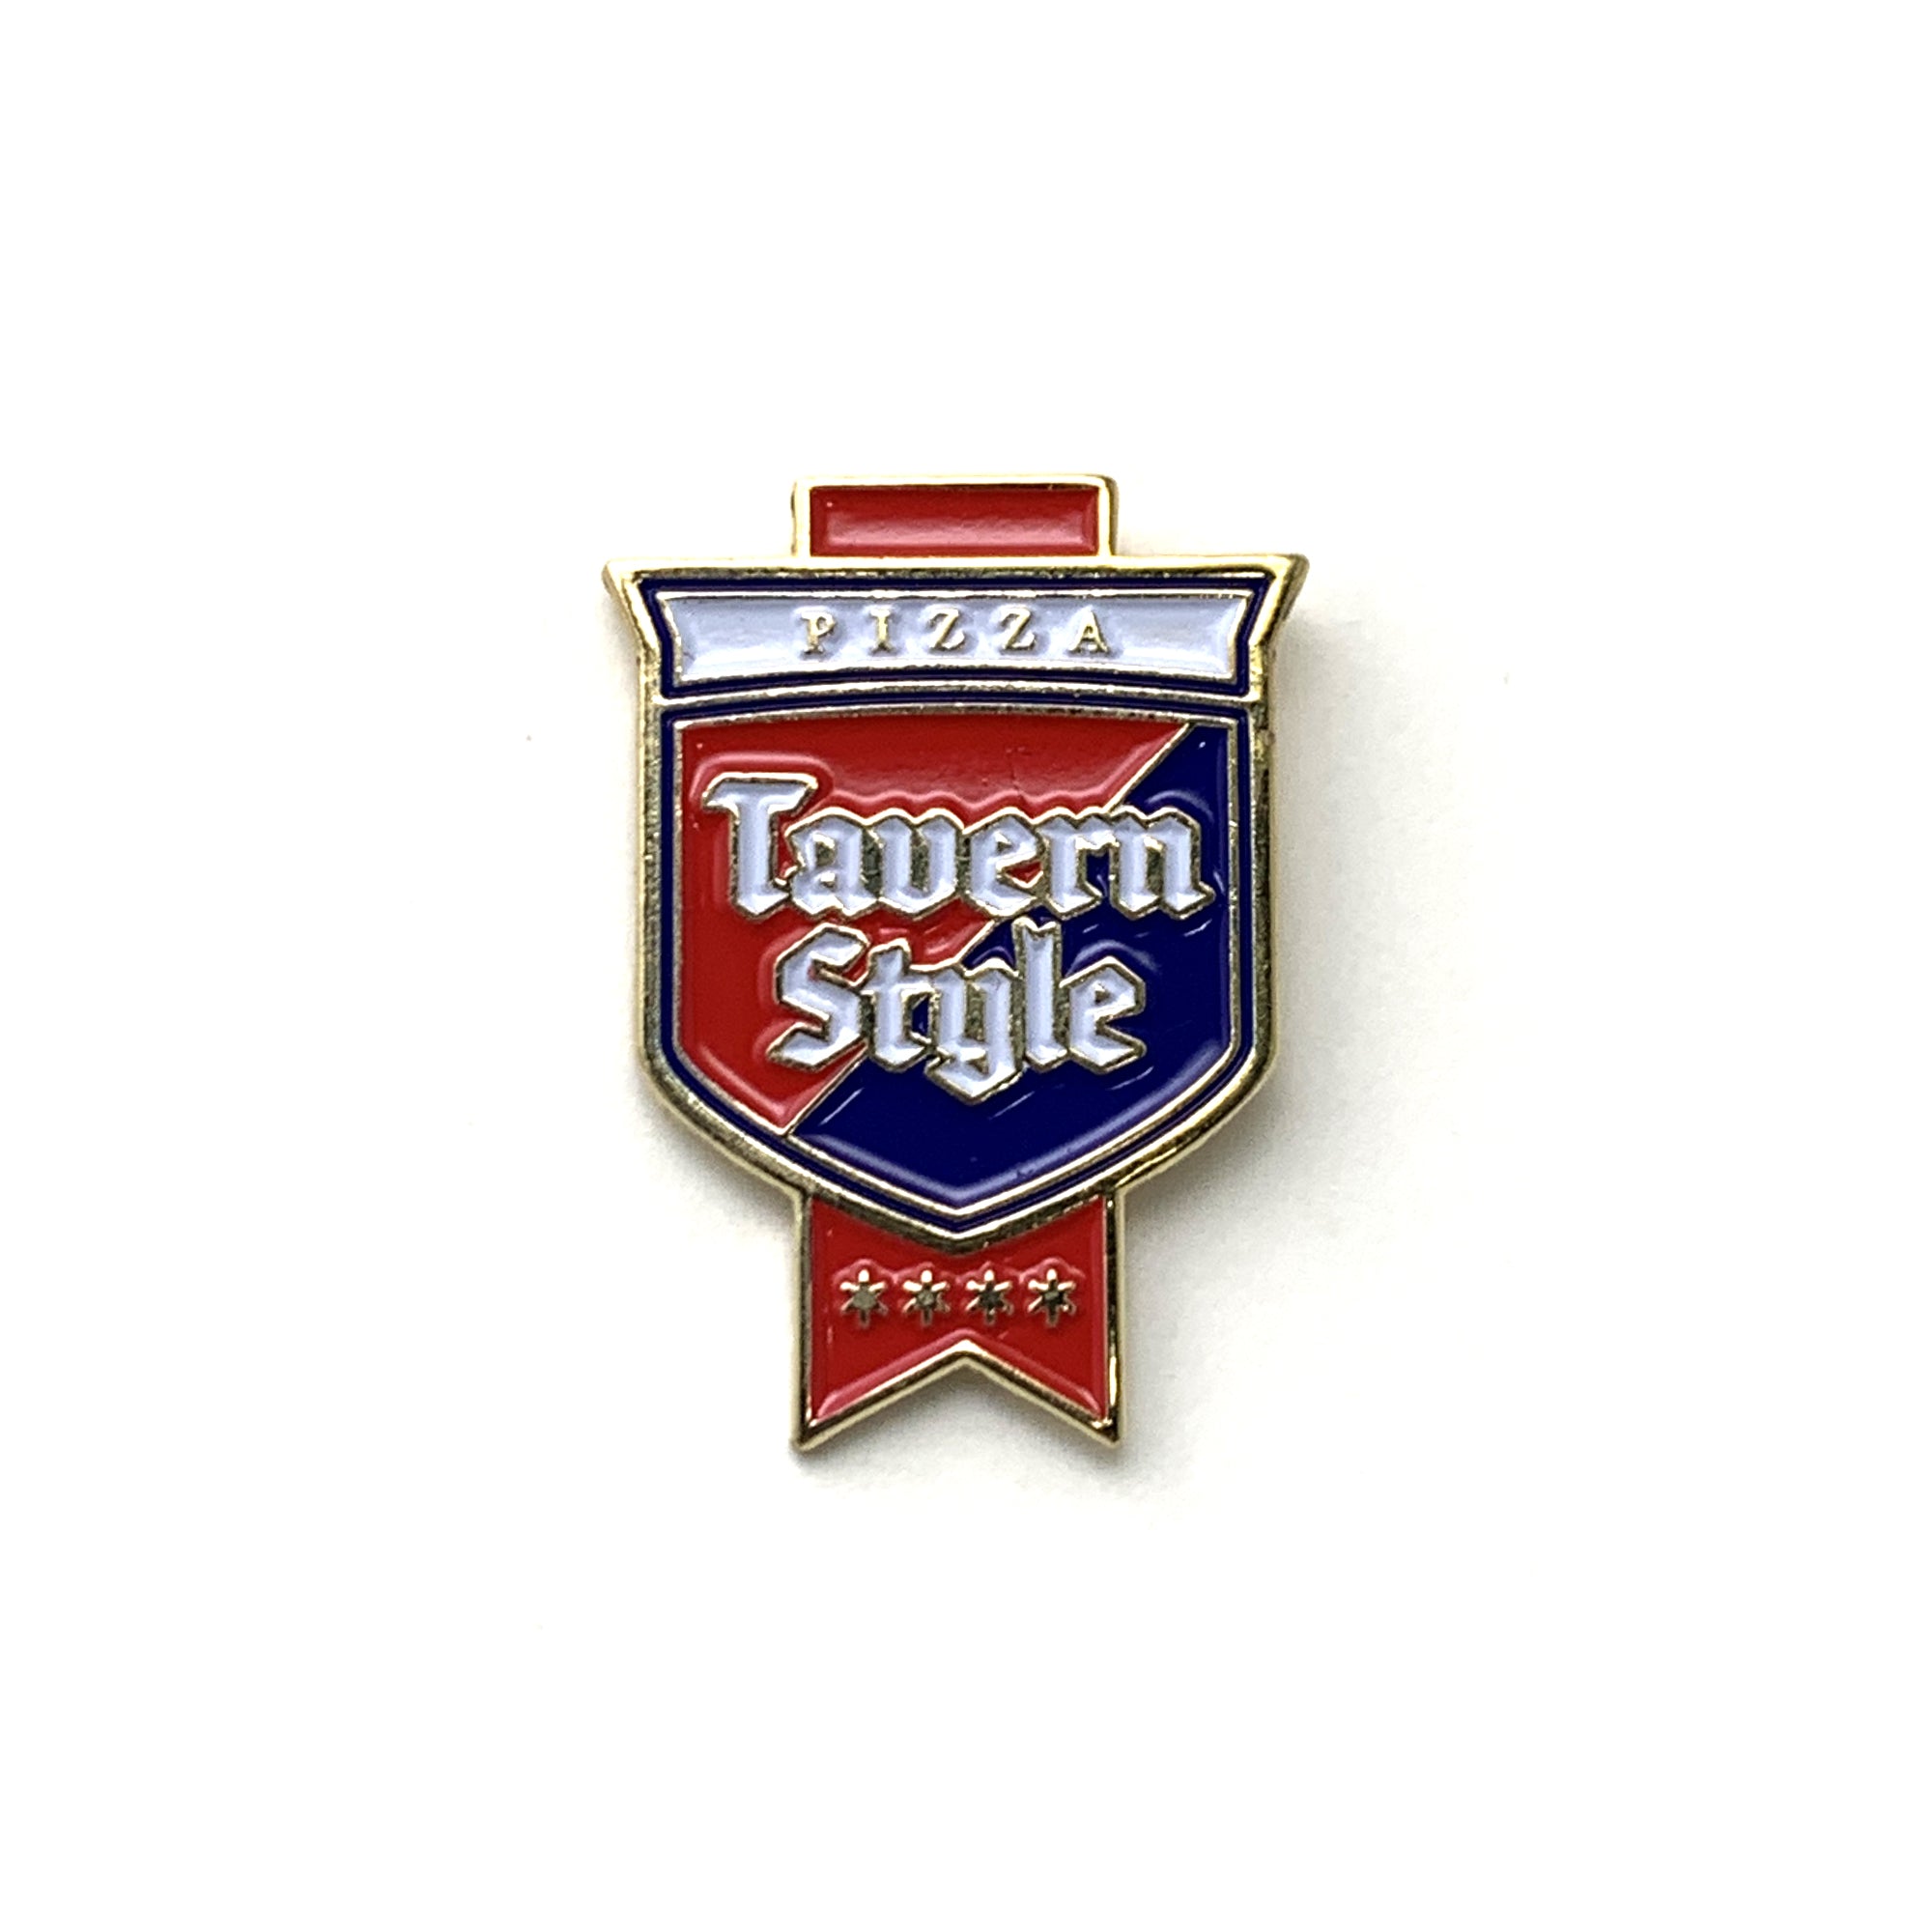 Tavern Style Pizza Sign Pin